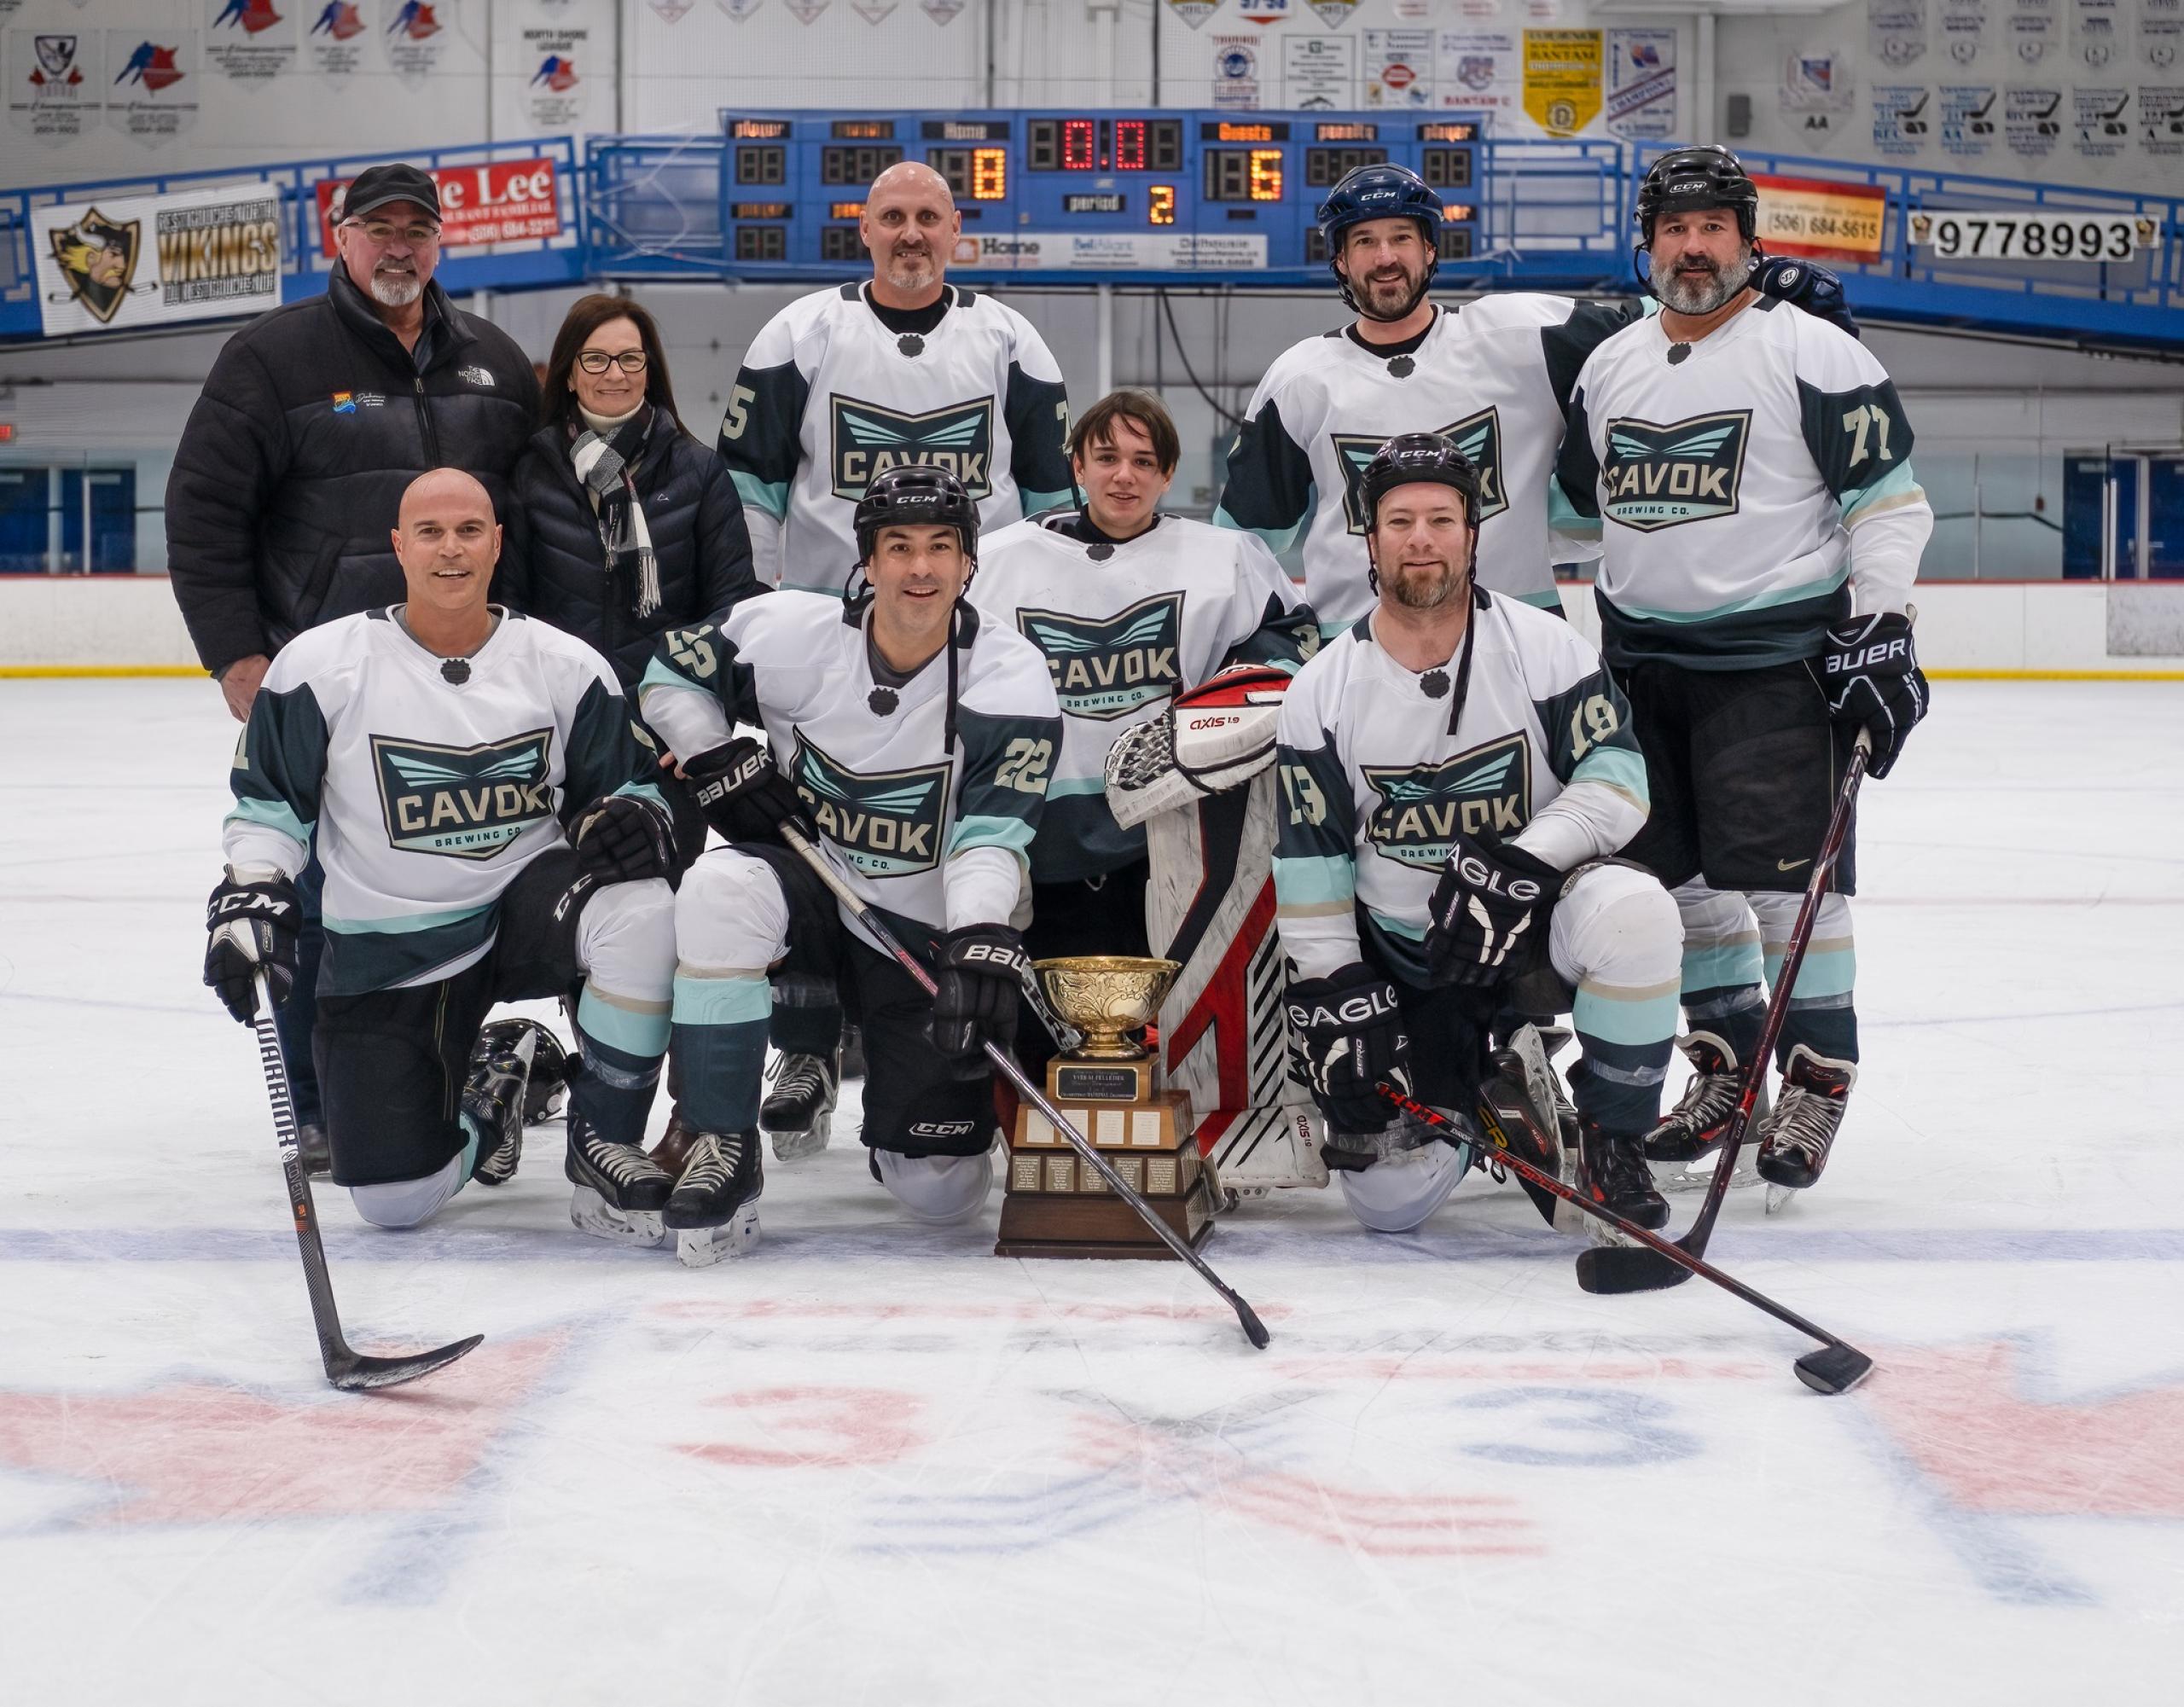 Chalet Le Nid du Heron Oldtimers Conference winners: Cavok Brewing North Stars